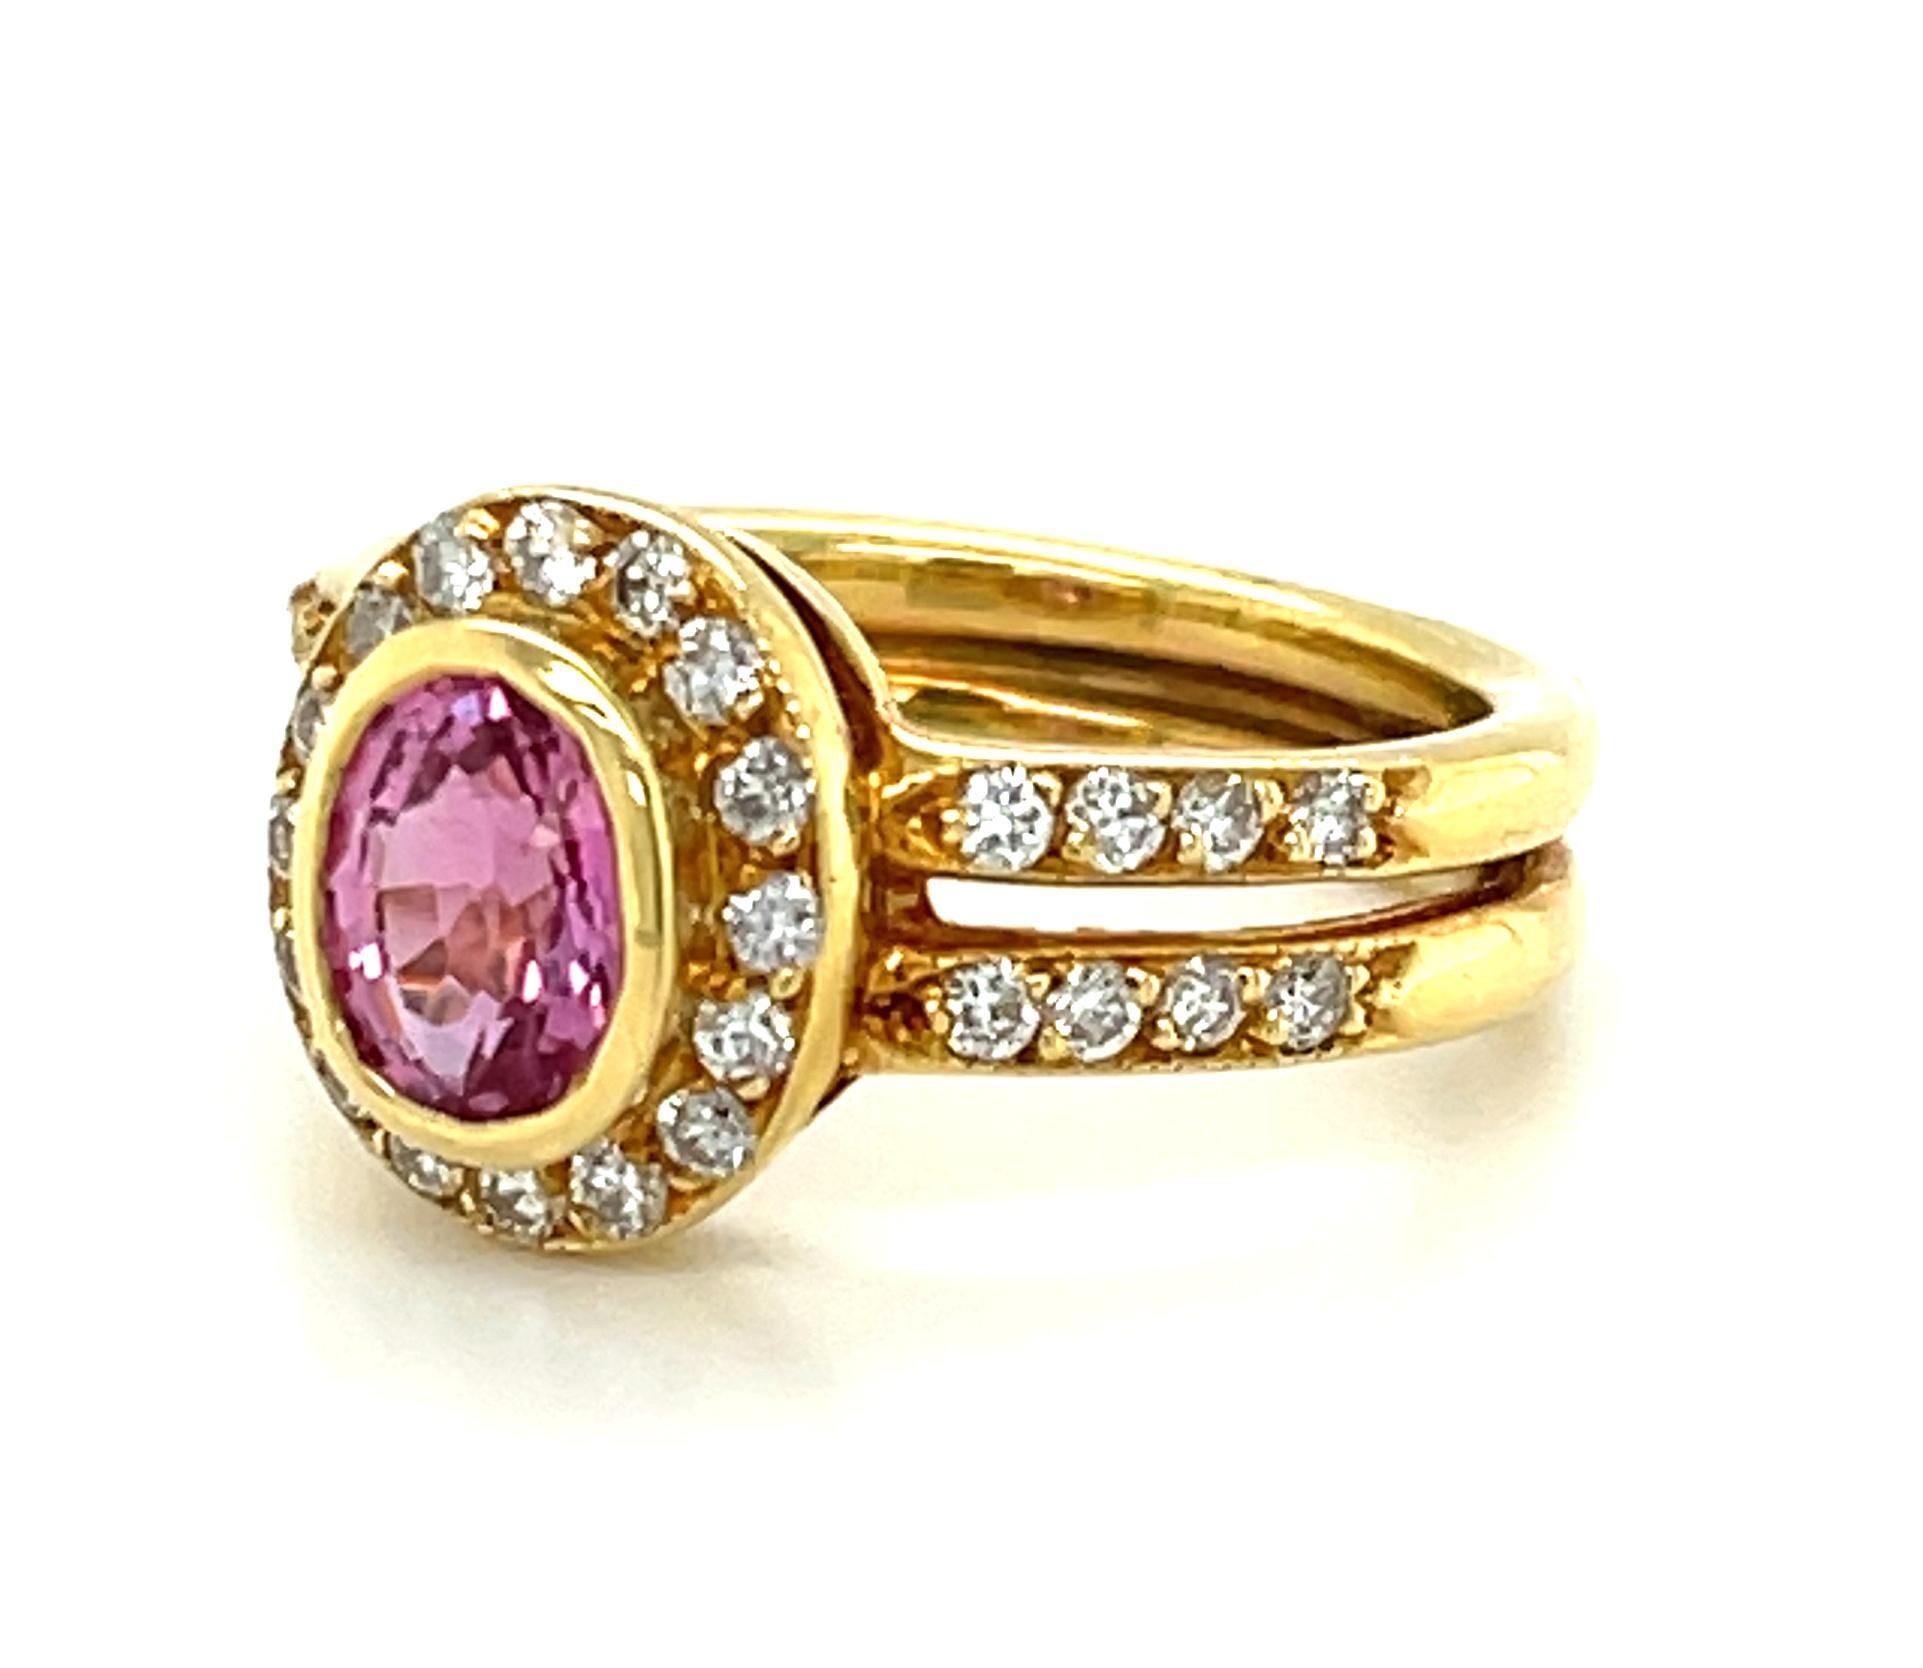 1.14 Carat Pink Sapphire and Diamond Halo Engagement Ring in 18k Gold In New Condition For Sale In Los Angeles, CA